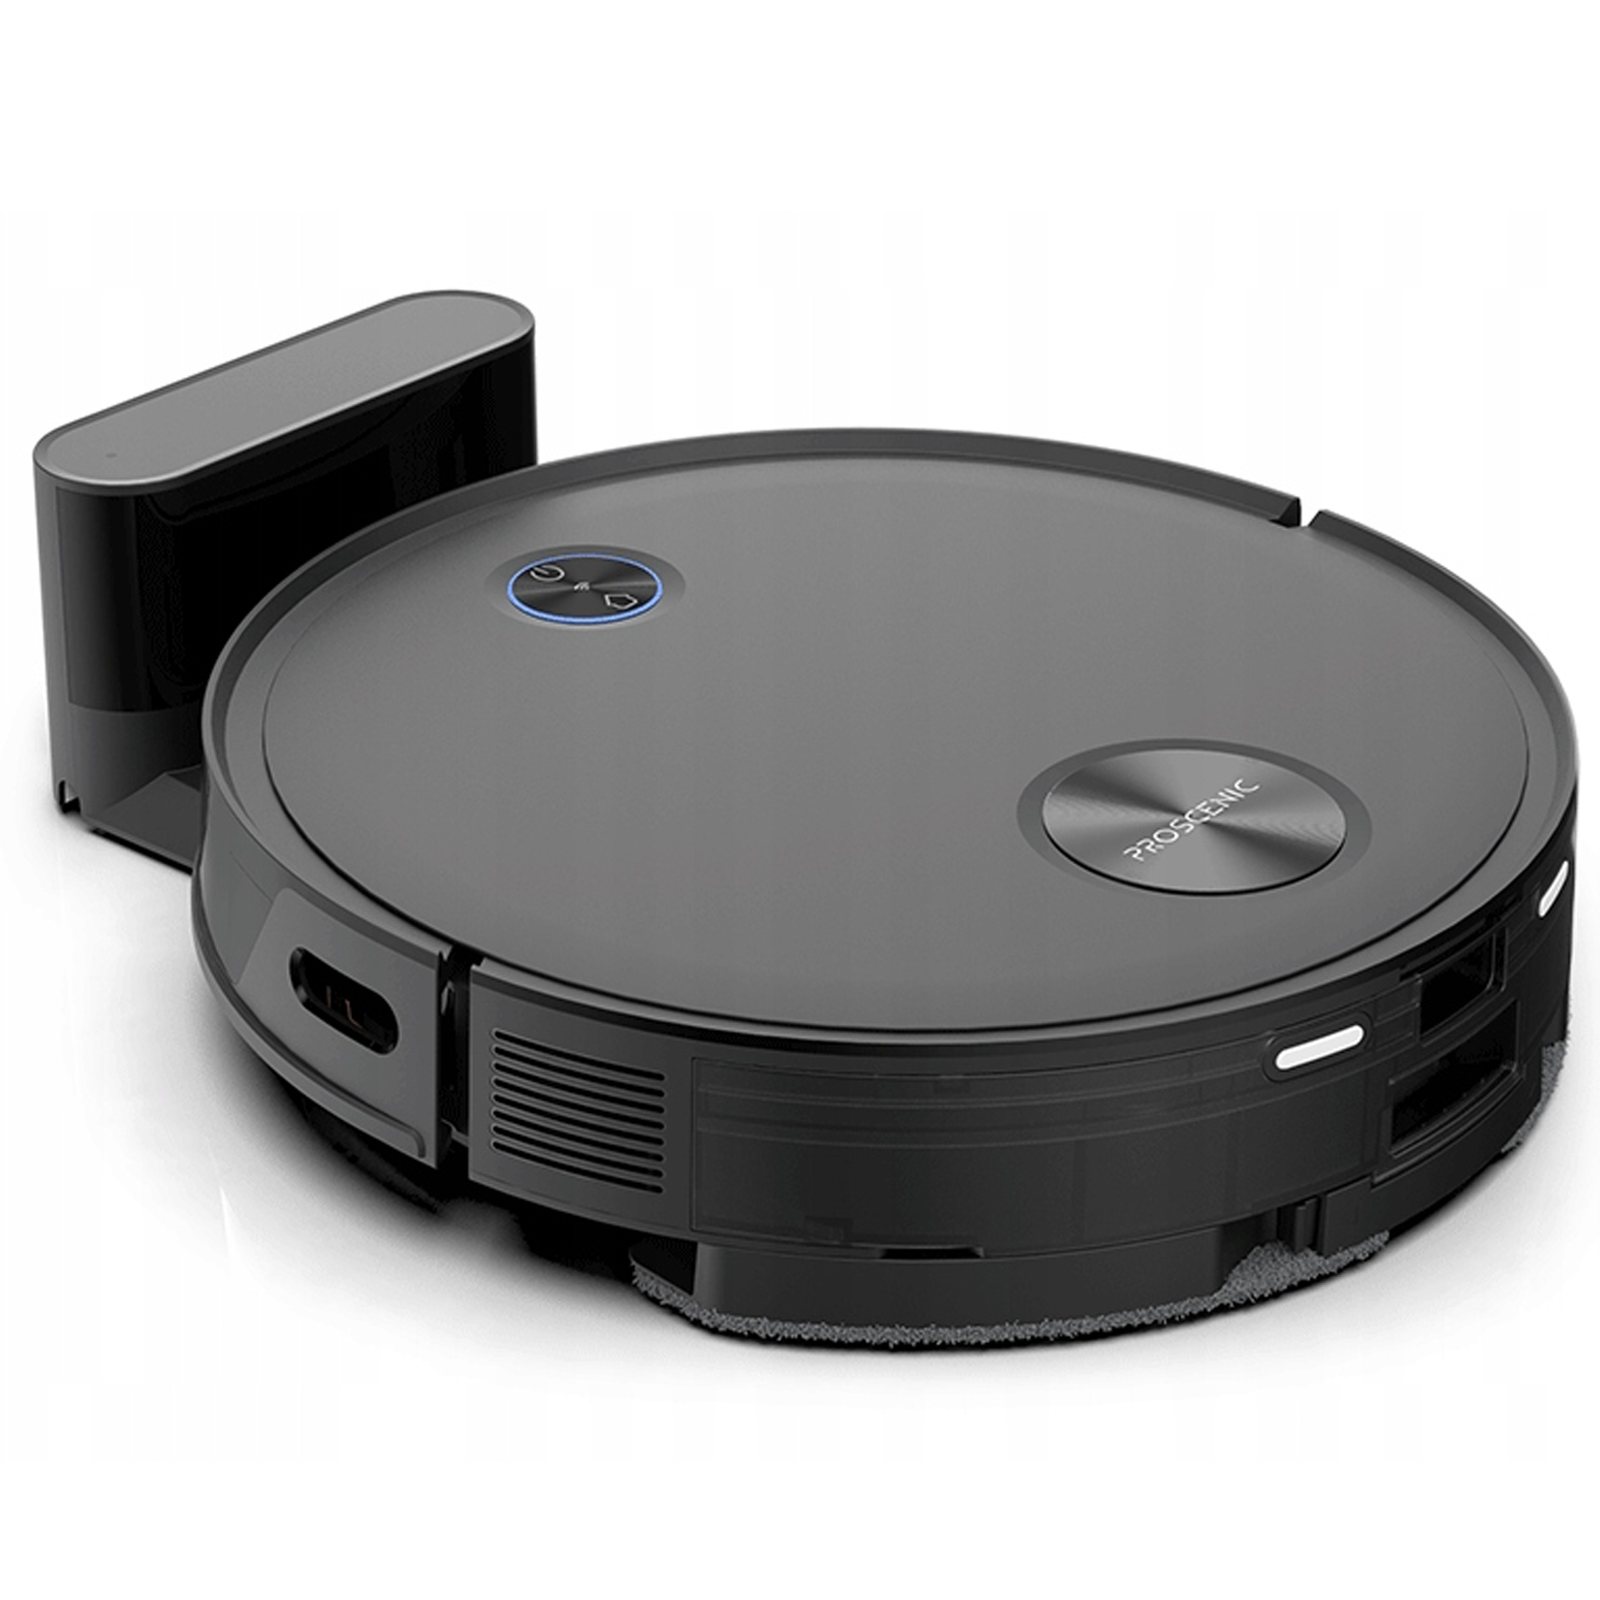 Even better price: Proscenic V10 is one of the best robotic vacuum cleaners  under €150: Vibrating mop, application and suction 3000 Pa